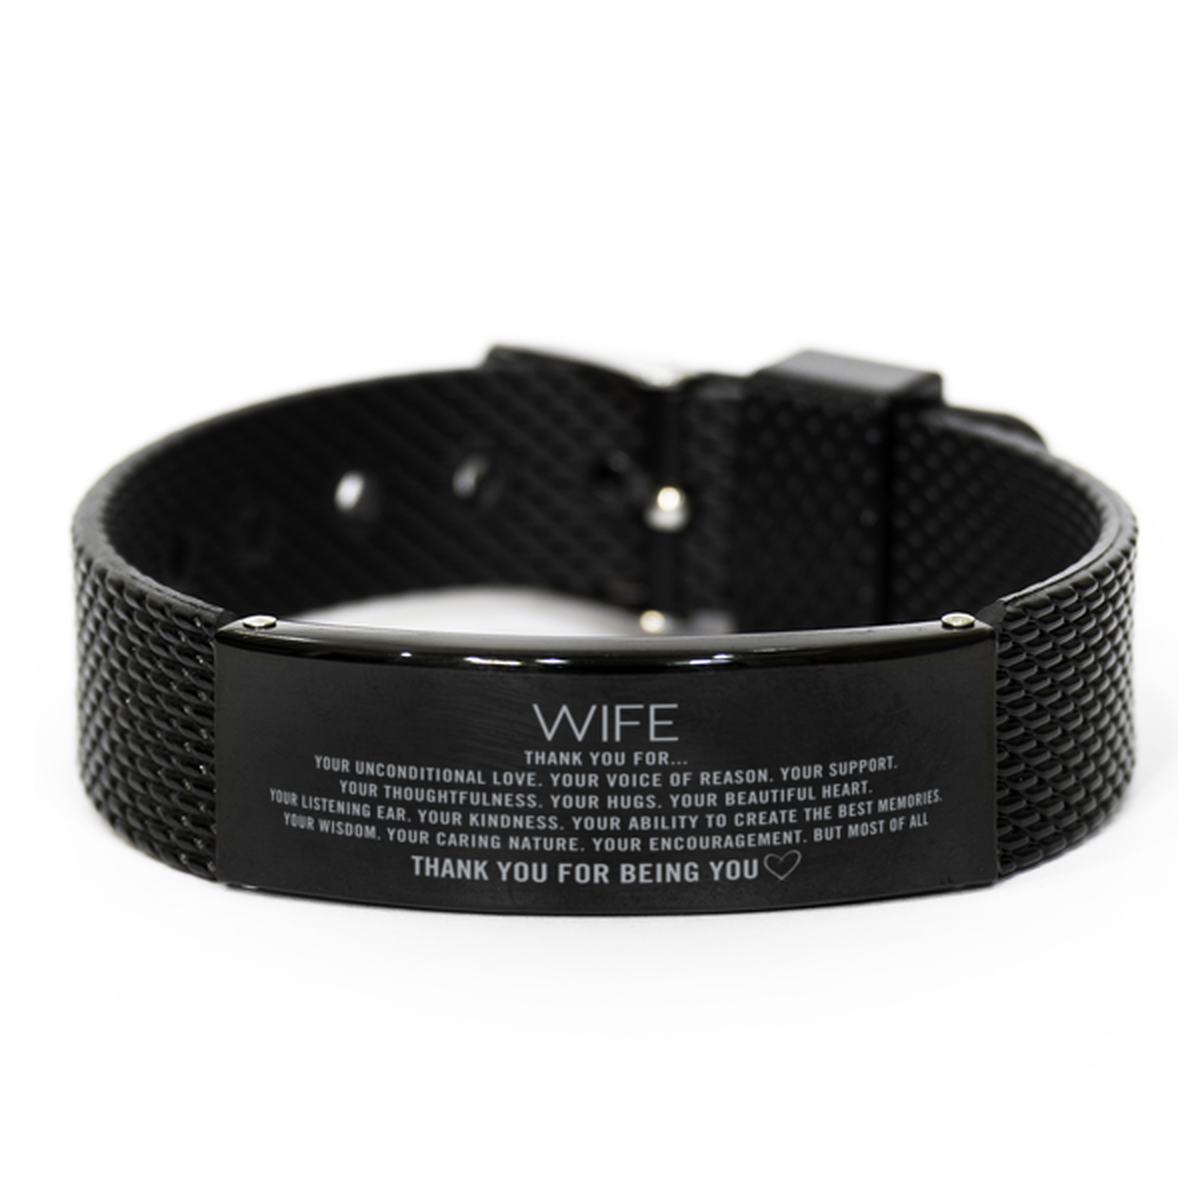 Wife Black Shark Mesh Bracelet Custom, Engraved Gifts For Wife Christmas Graduation Birthday Gifts for Men Women Wife Thank you for Your unconditional love